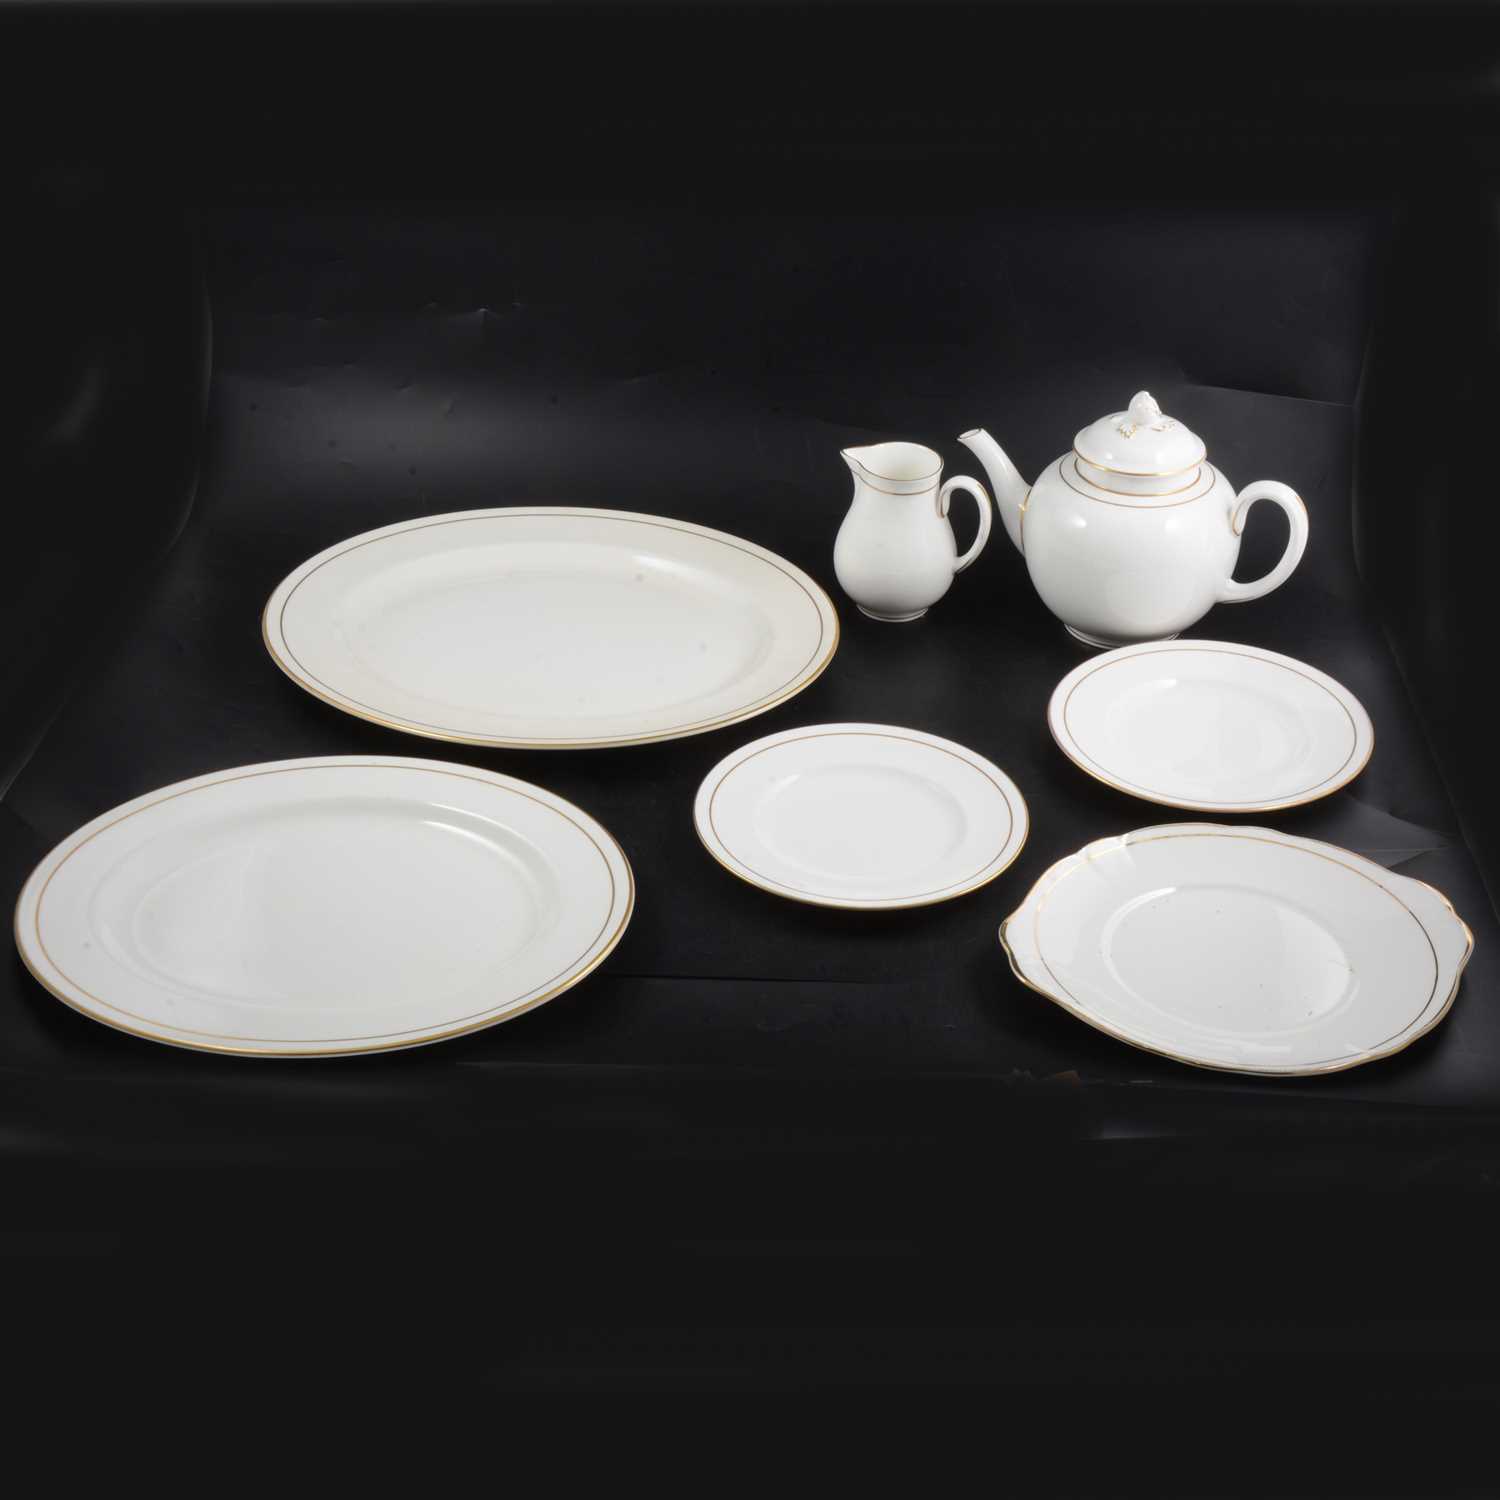 Lot 30 - Royal Worcester 'Contessa' pattern bone china part dinner and tea service.